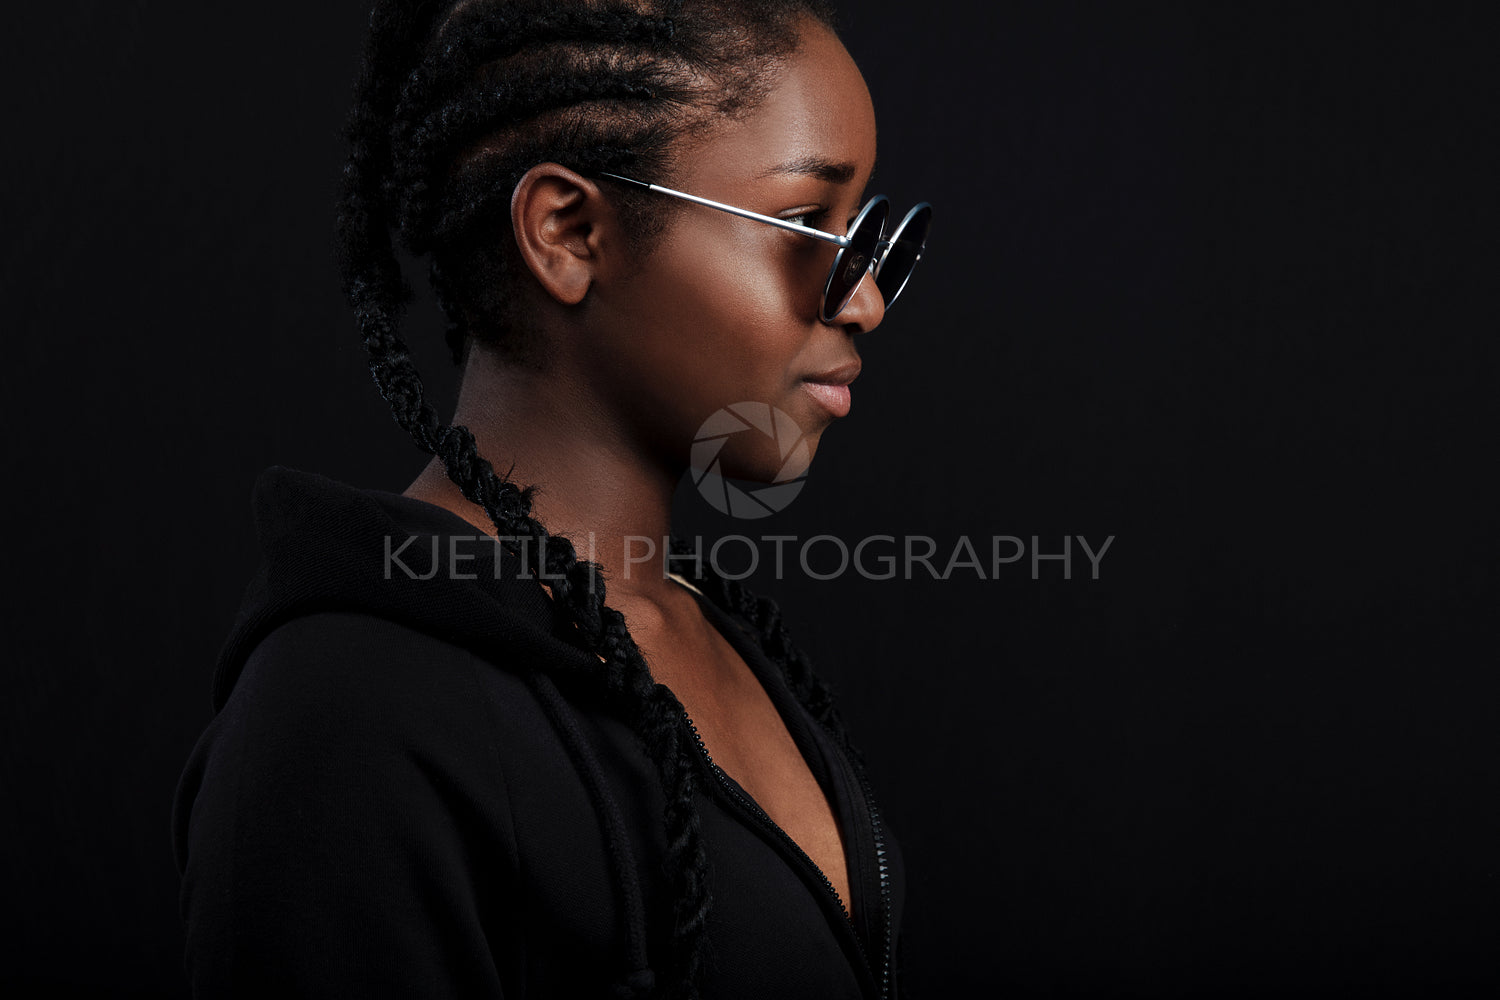 Cool african woman sitting with dark skin wearing round sunglasses